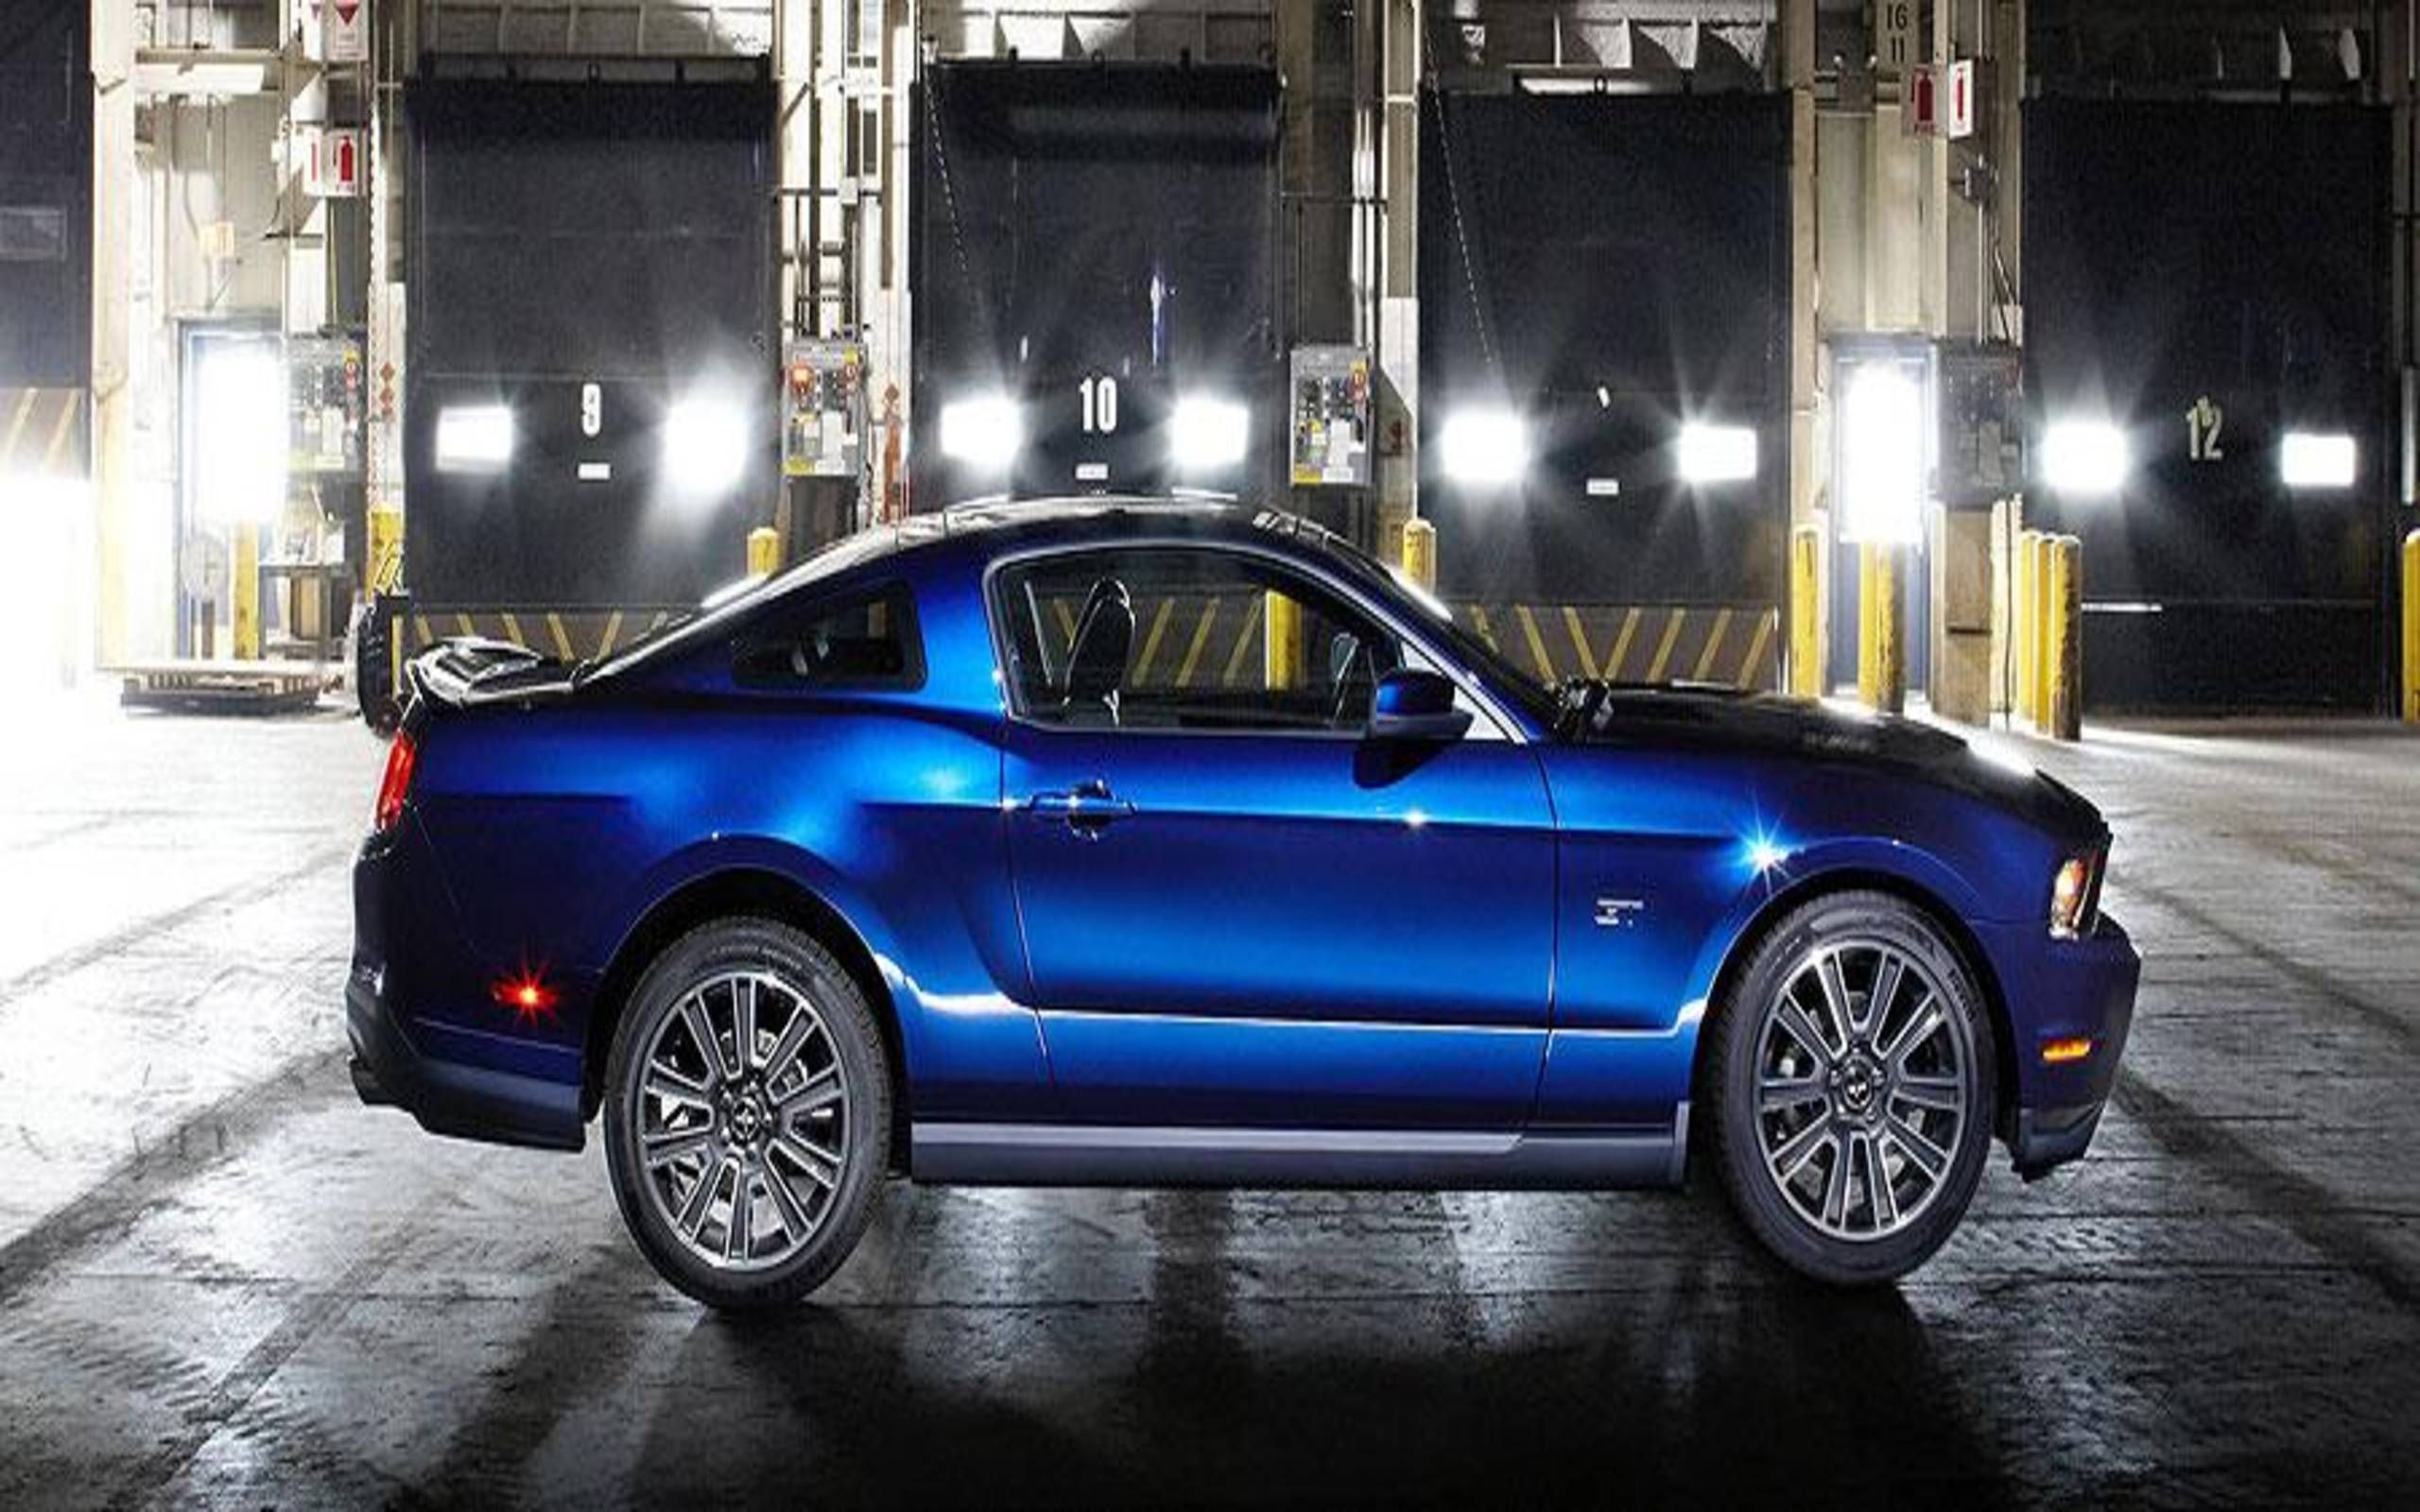 Rob's Movie Muscle: The Shelby Mustang From Need For Speed - Street Muscle  Rob's Movie Muscle